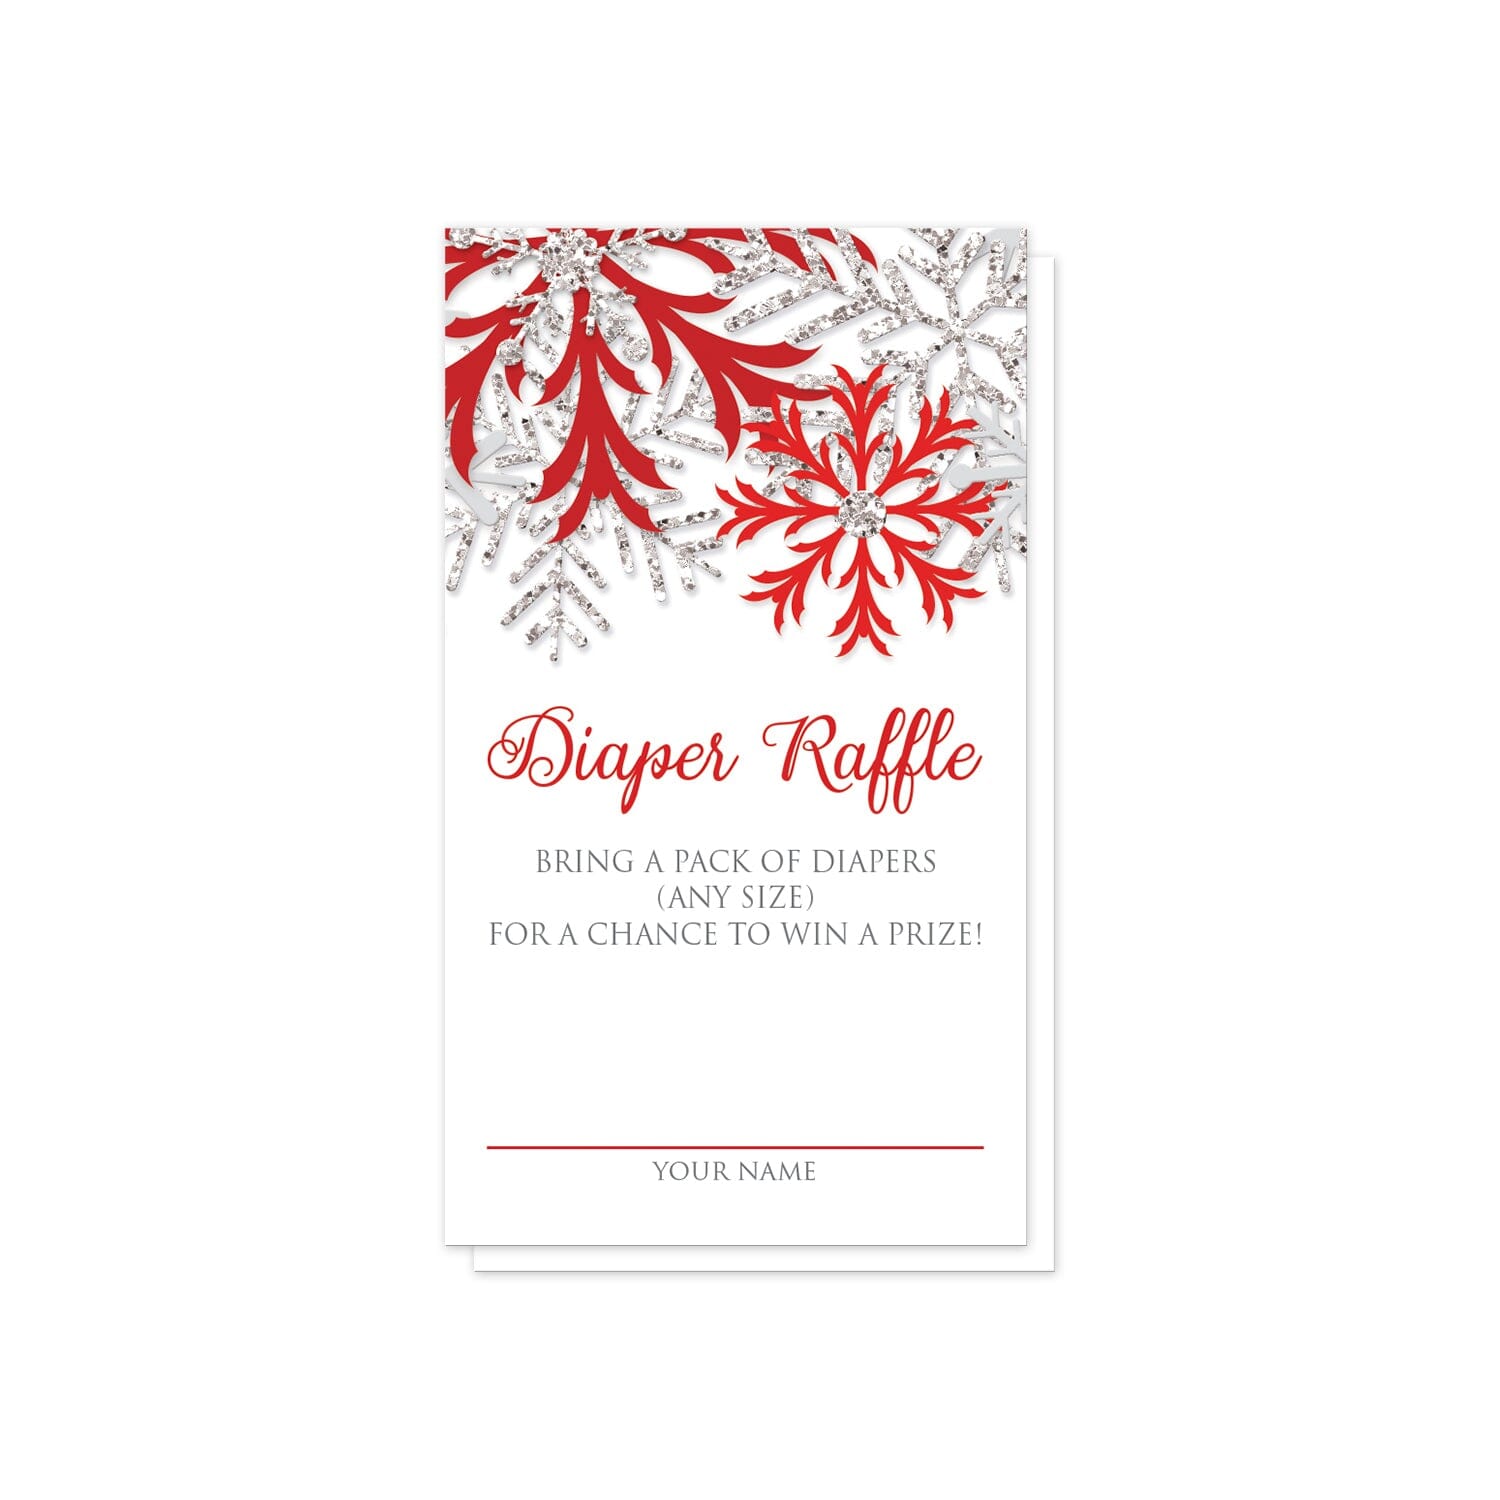 Winter Red Silver Snowflake Diaper Raffle Cards at Artistically Invited. Pretty winter red silver snowflake diaper raffle cards designed with red, darker red, and silver glitter-illustrated snowflakes along the top of the cards. Your diaper raffle details are printed in red and gray on white below the snowflakes. 